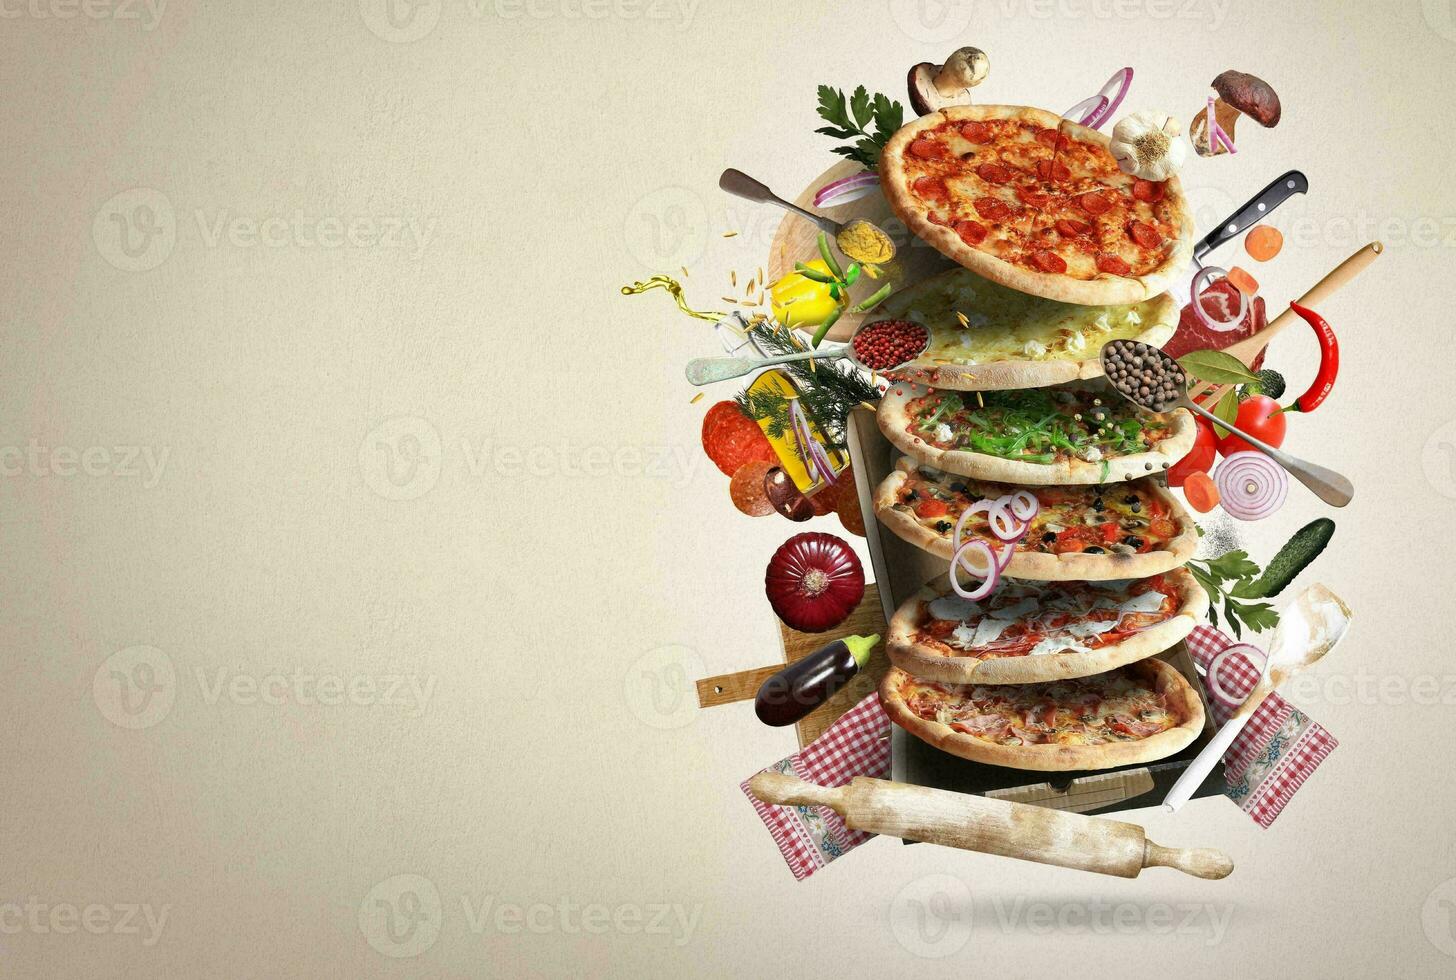 italian pizza food meal dinner lunch restaurant background photo